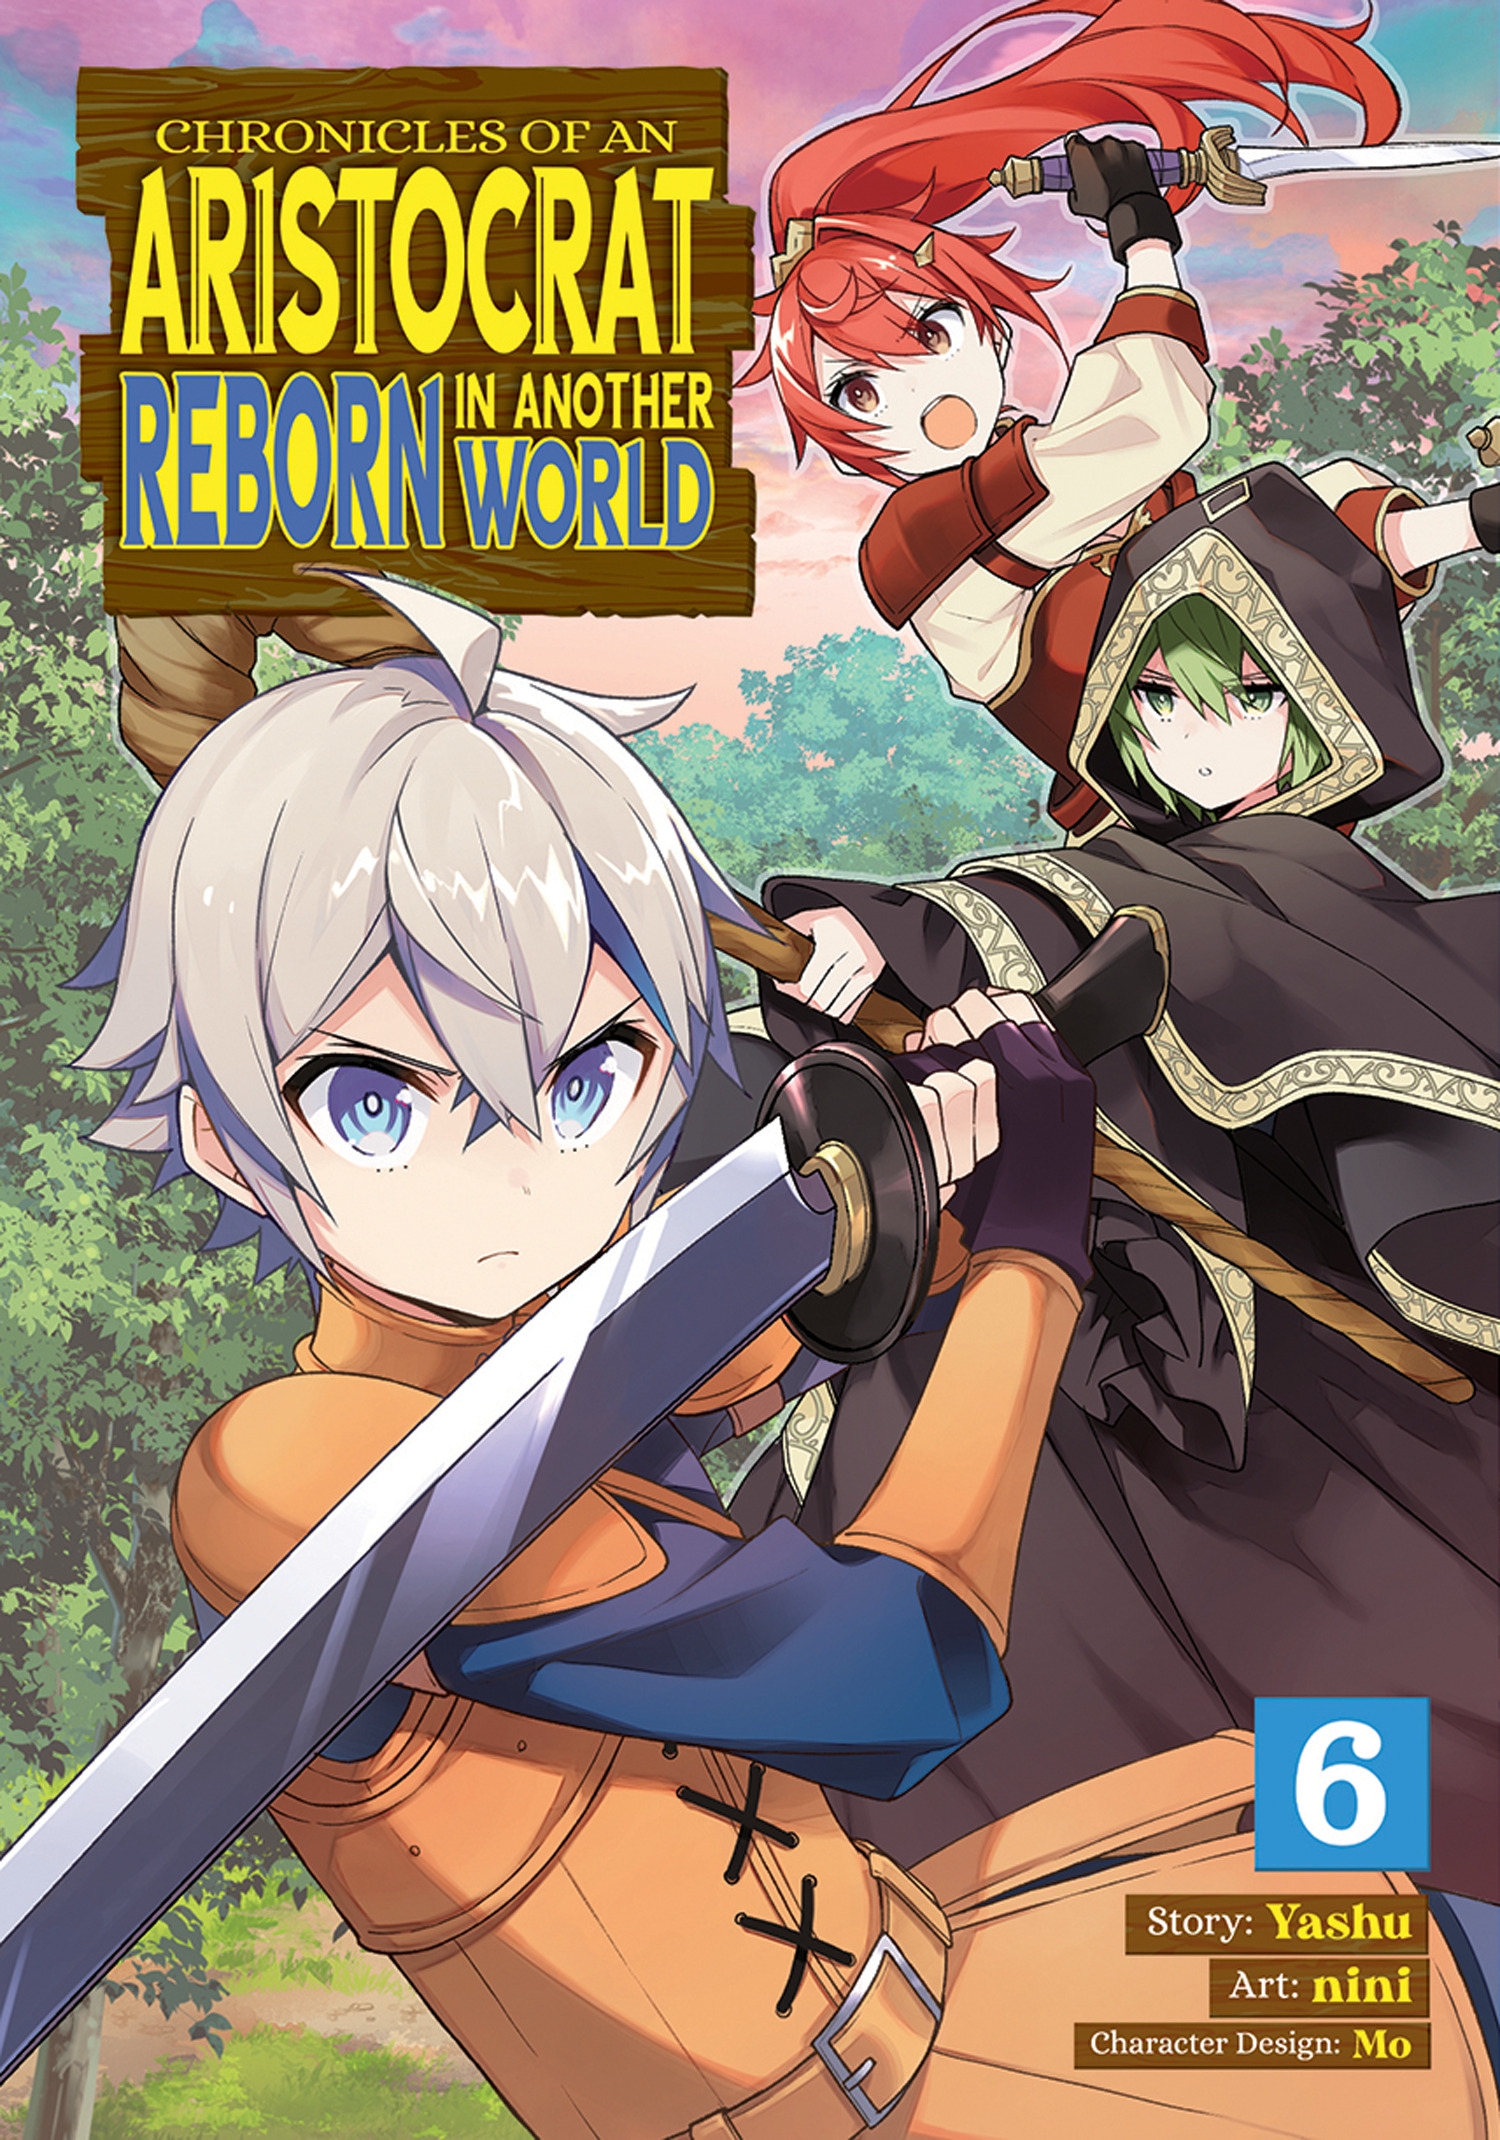 Chronicles of an Aristocrat Reborn in Another World Manga Volume 8 |  RightStuf